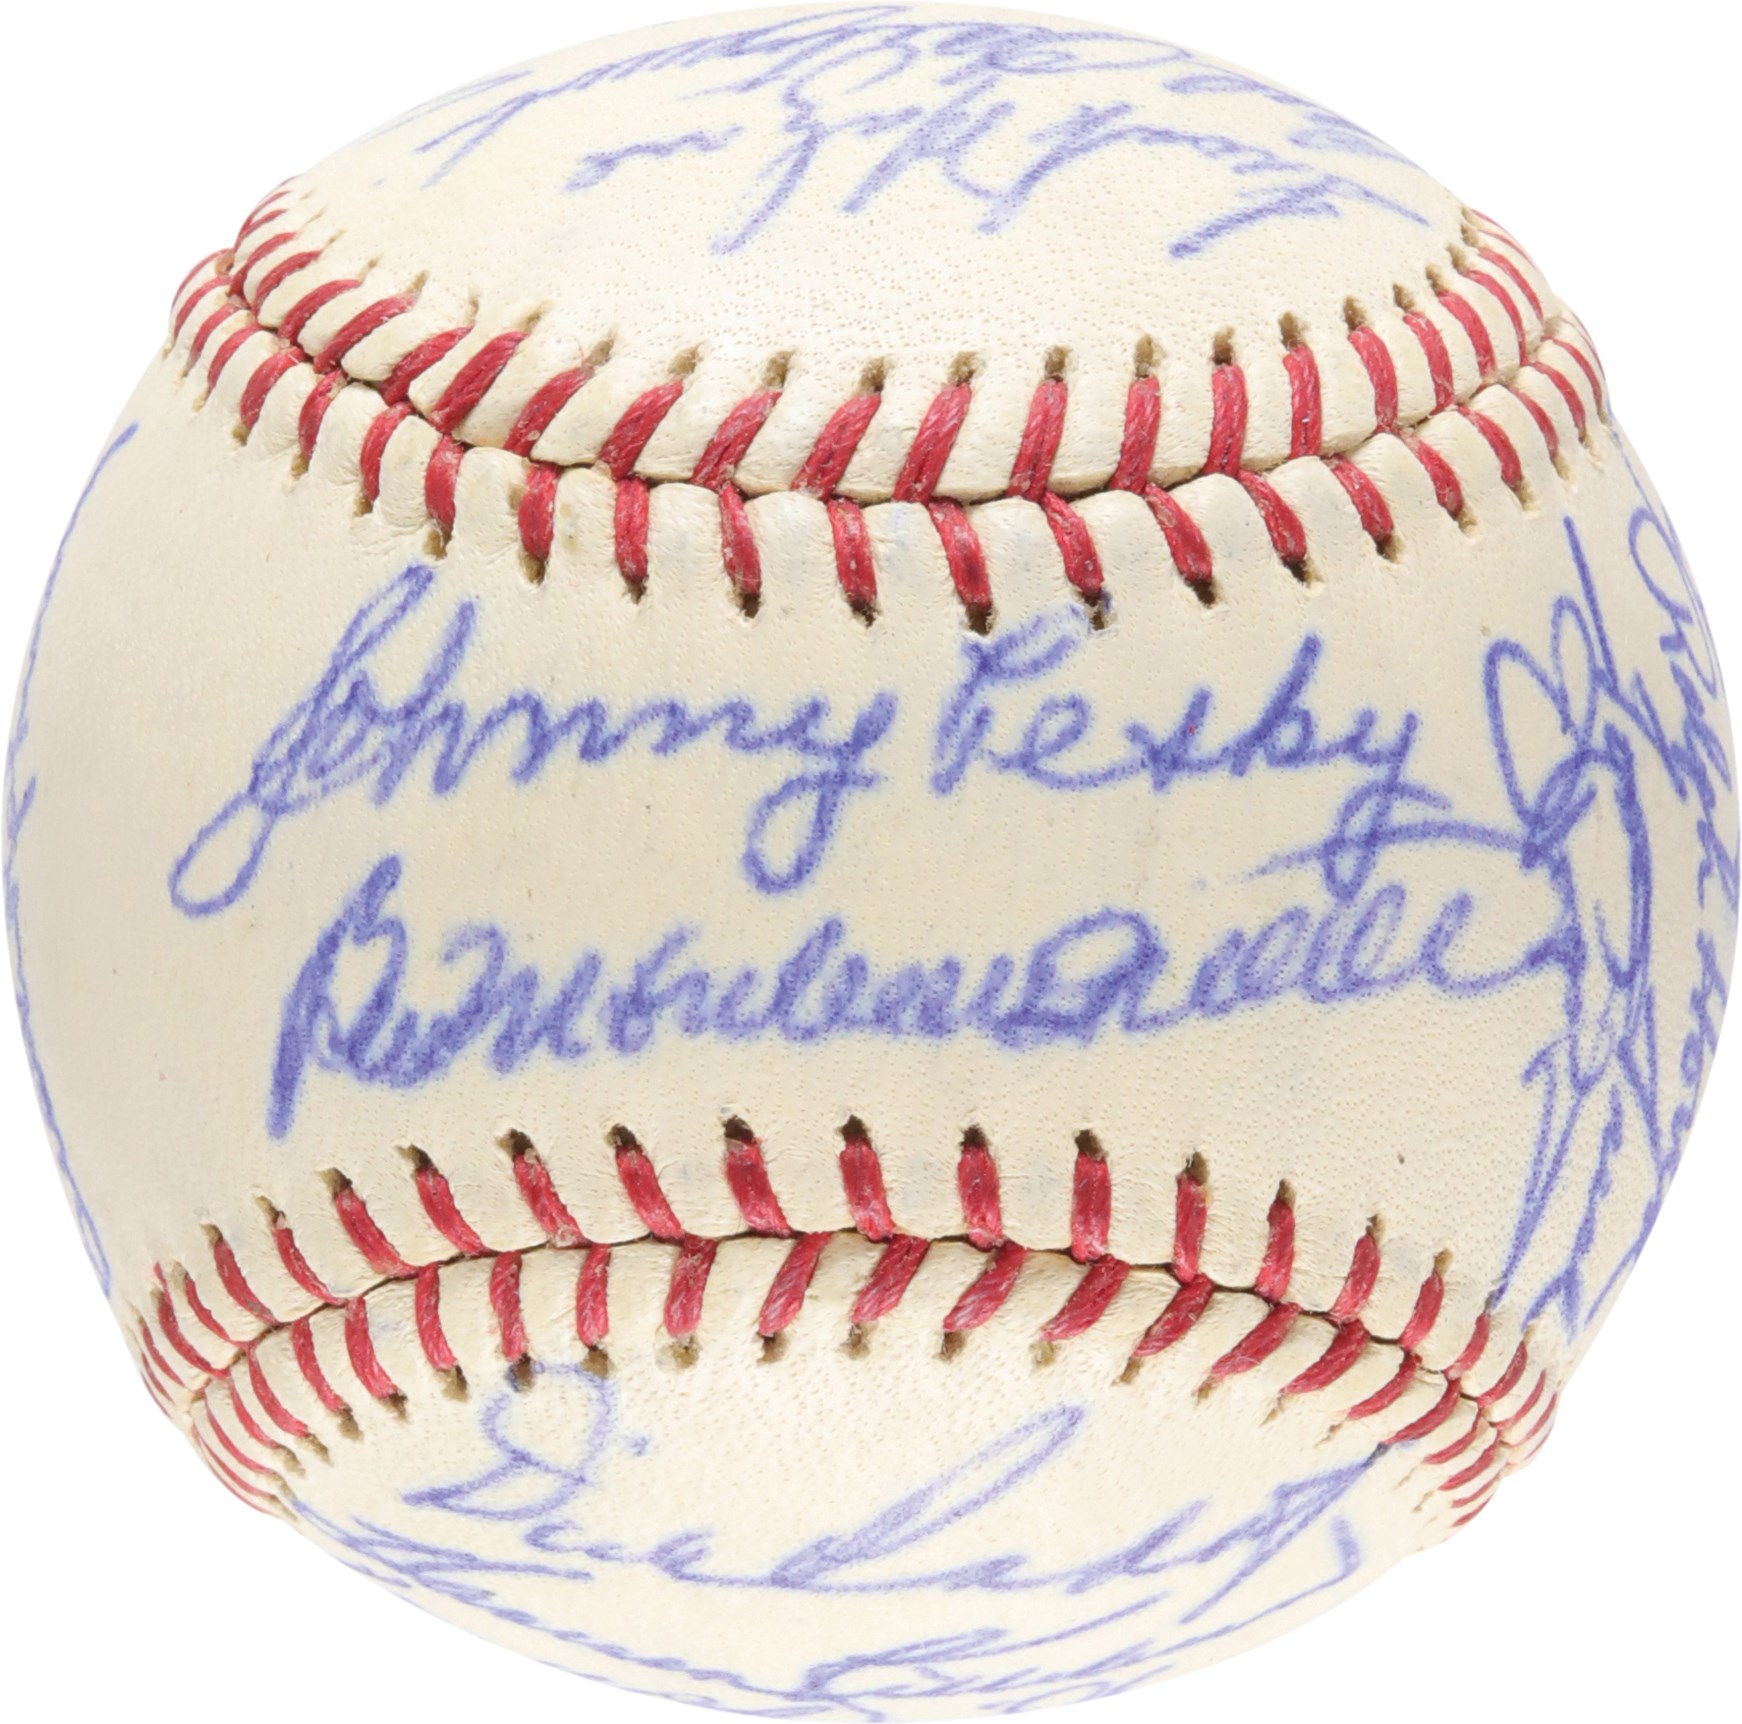 - 1963 American League All-Star Team-Signed Baseball (ex-Al Kaline Collection)